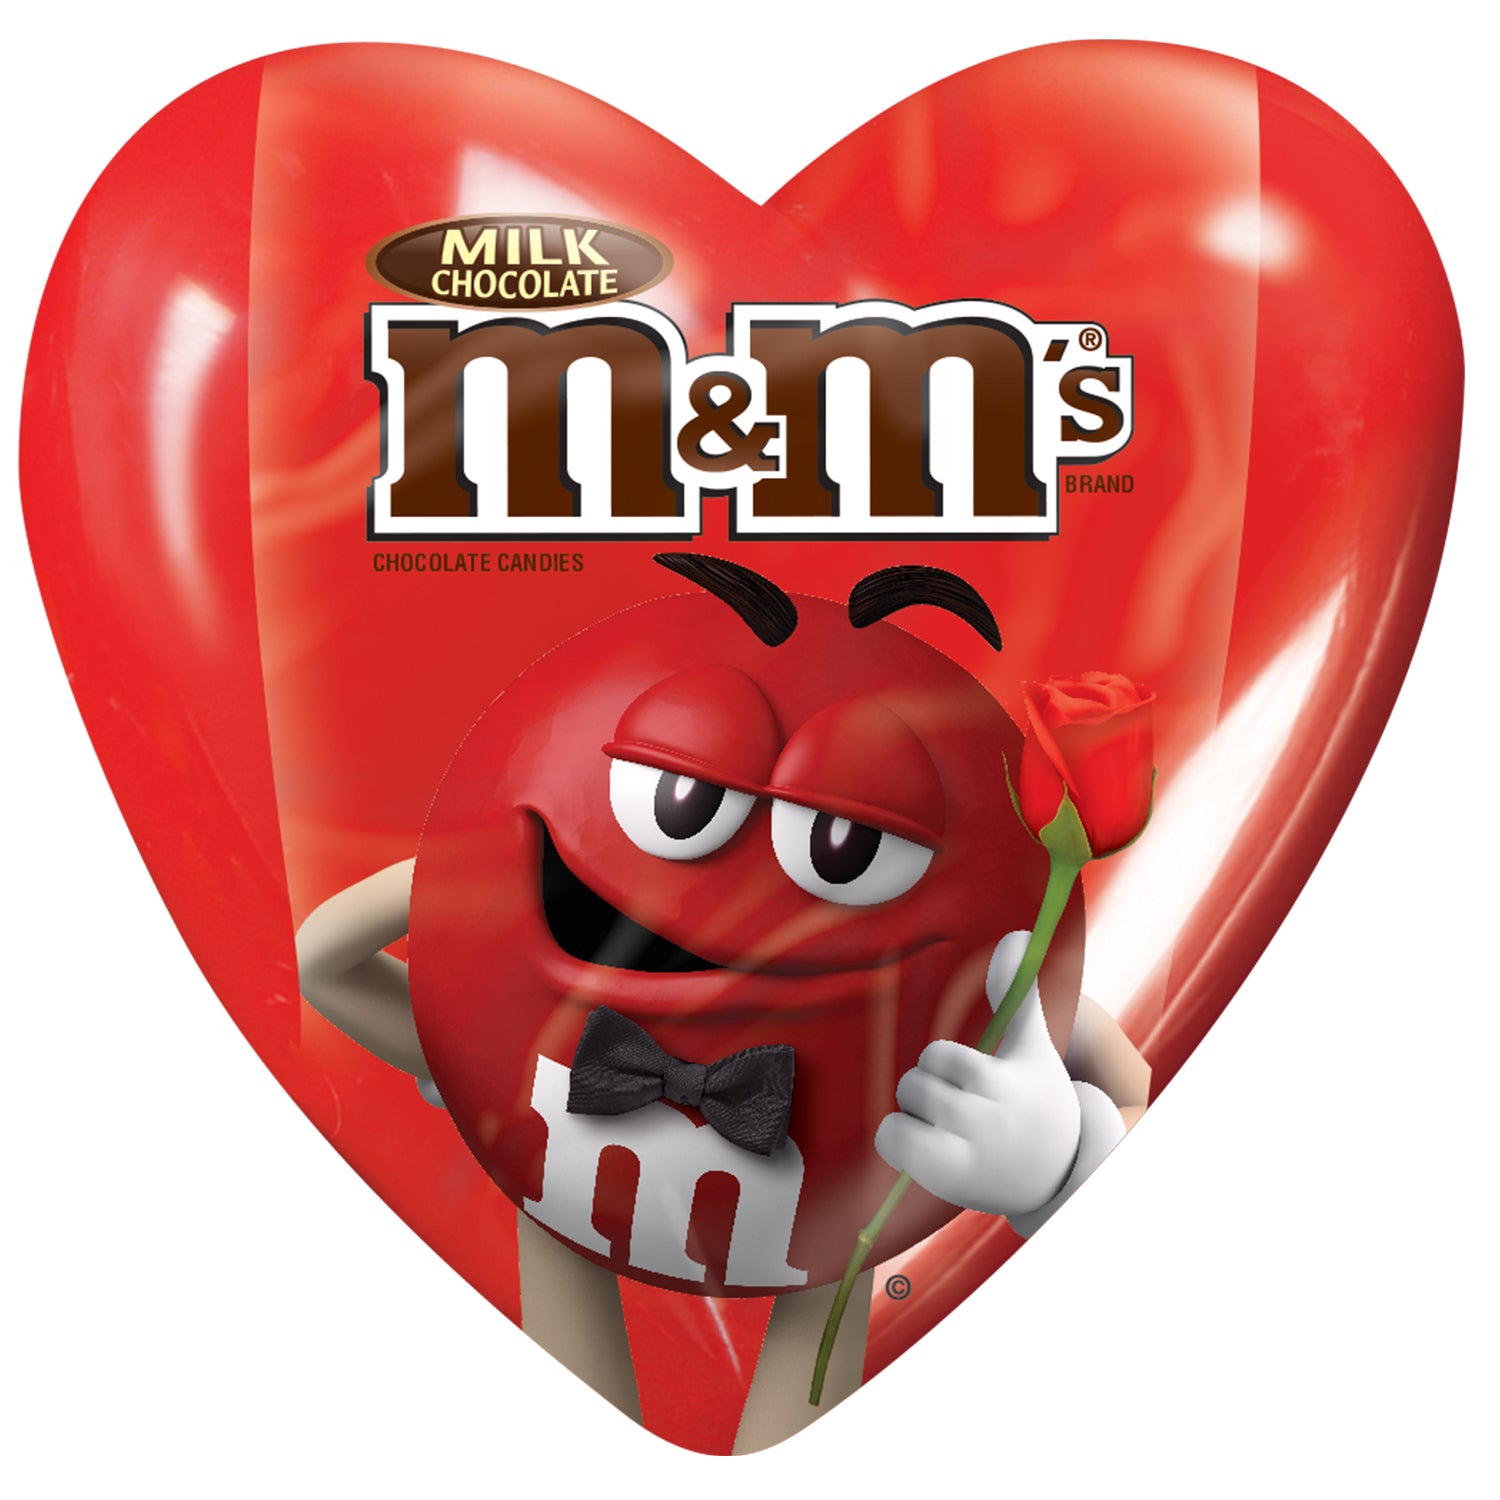 M&Ms all the way